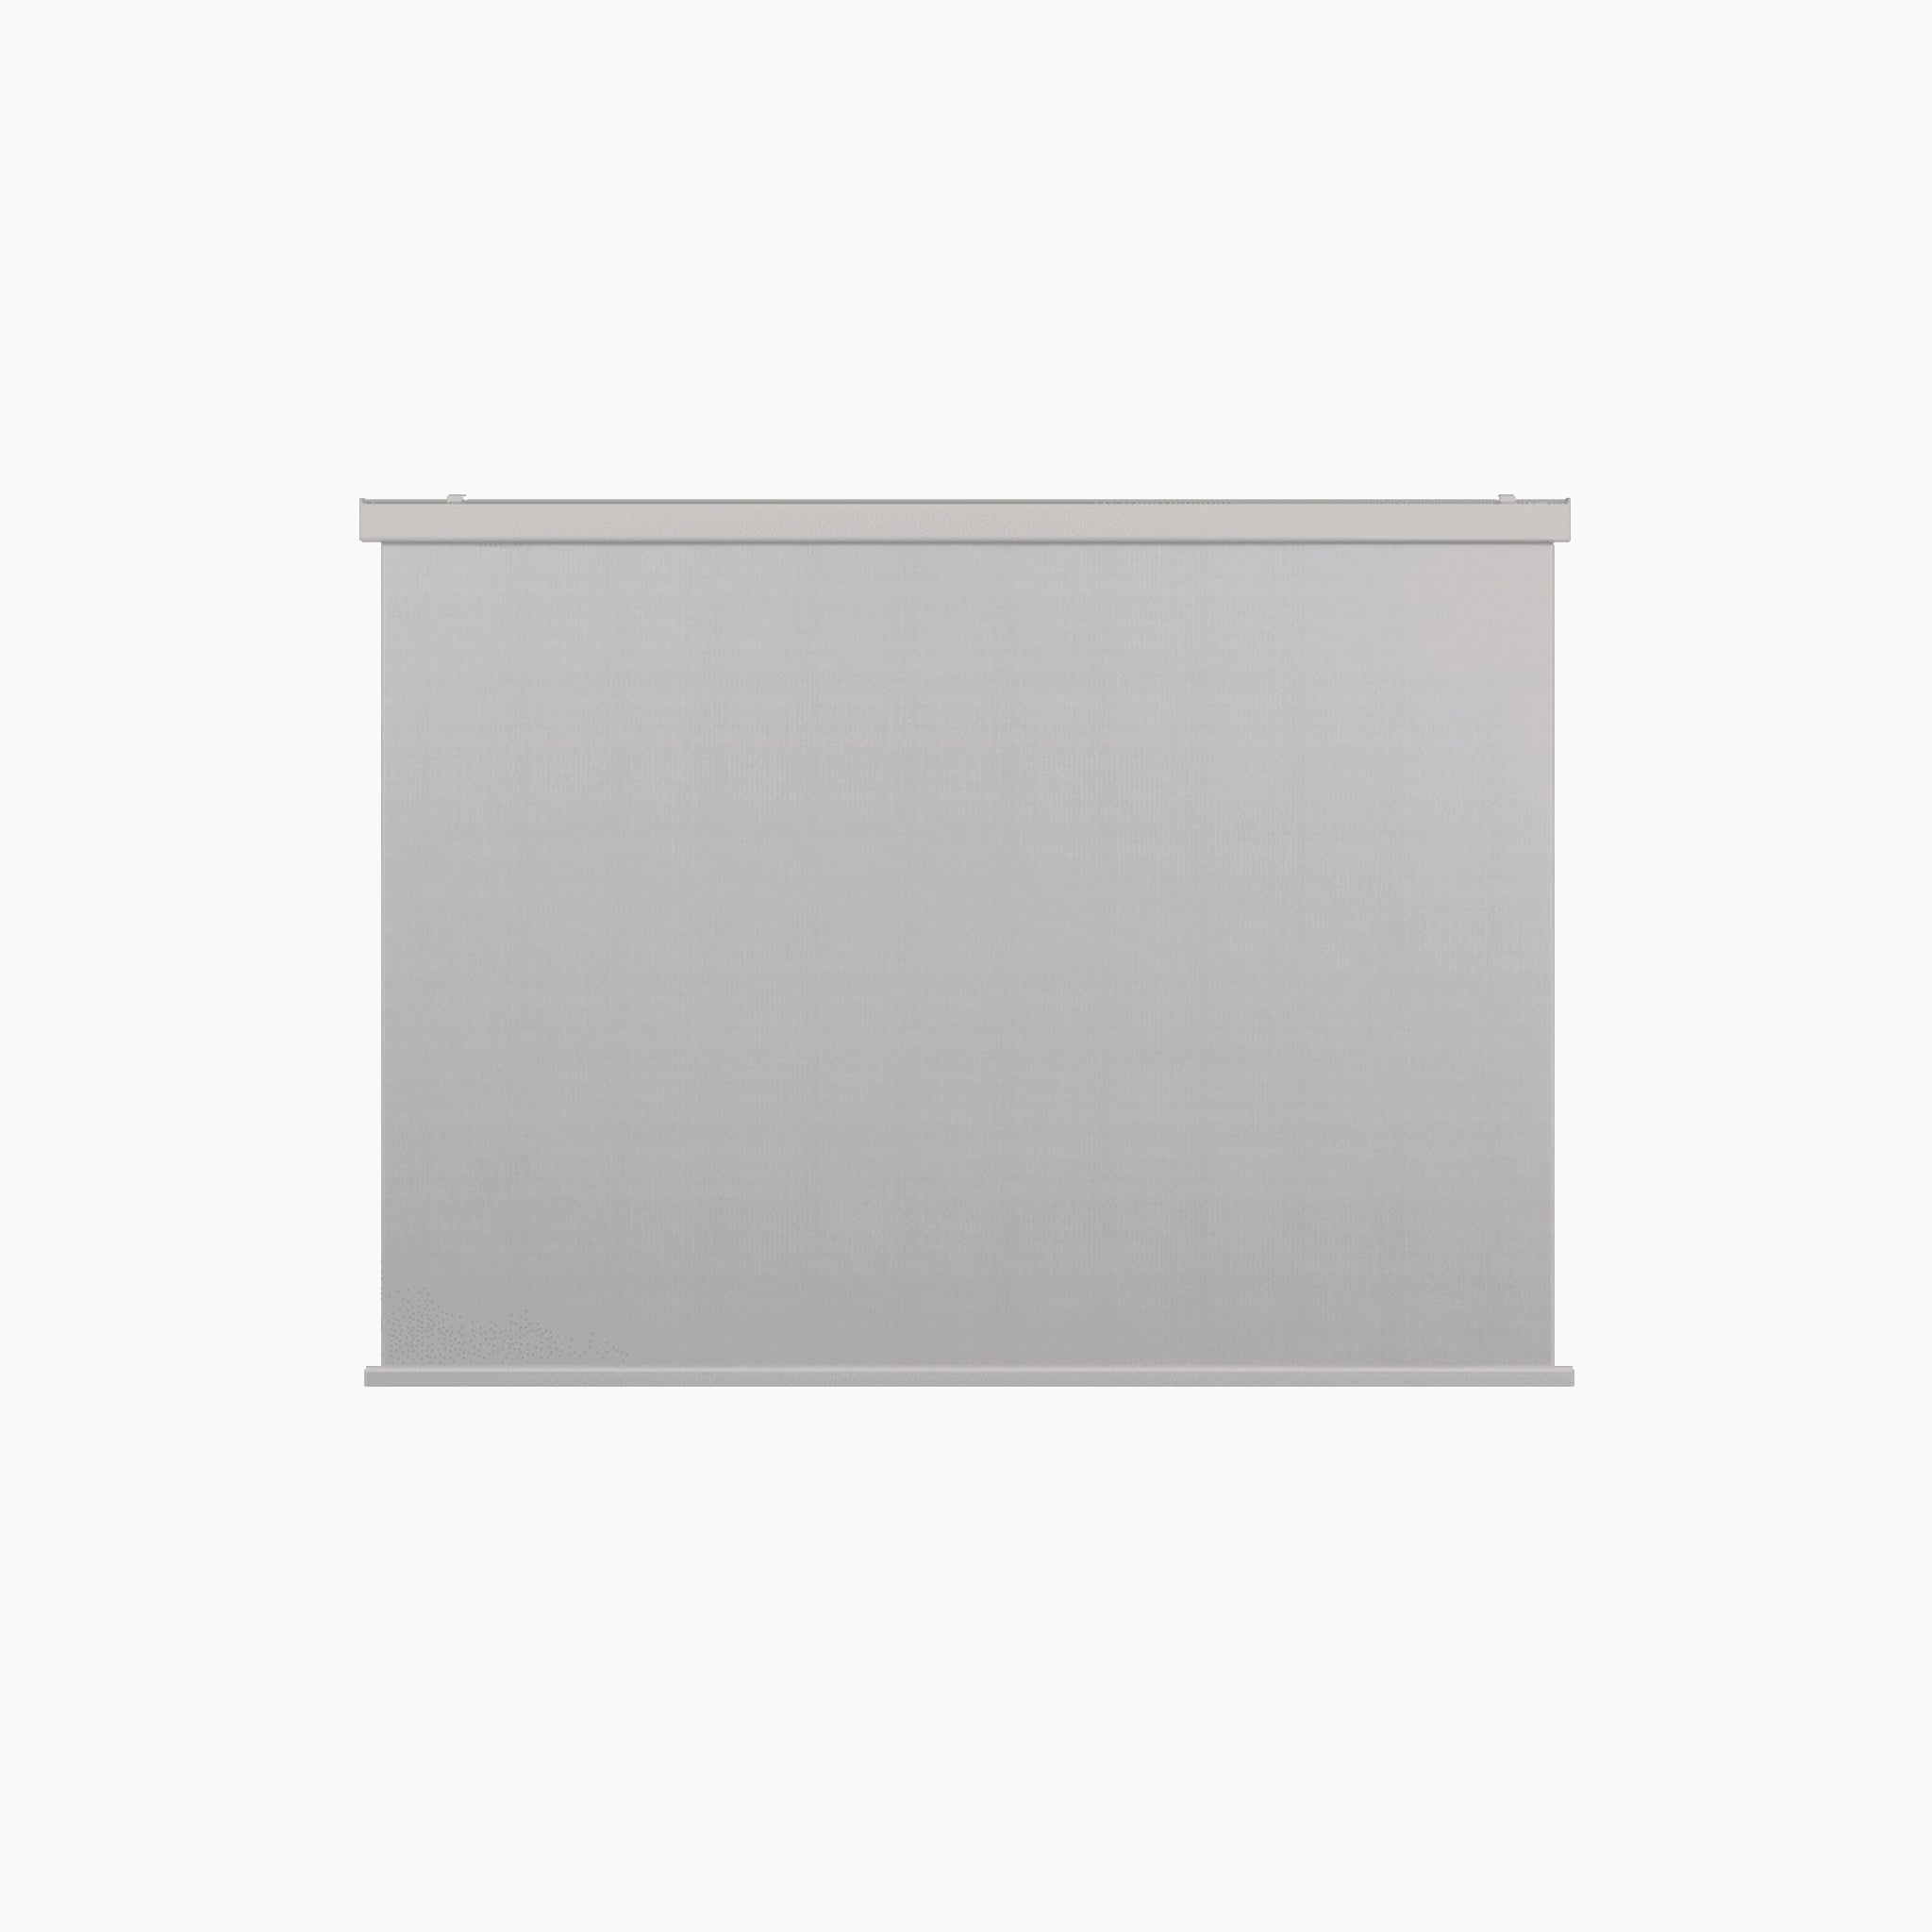 1x - 4M Integrated Manual Side Blind / White